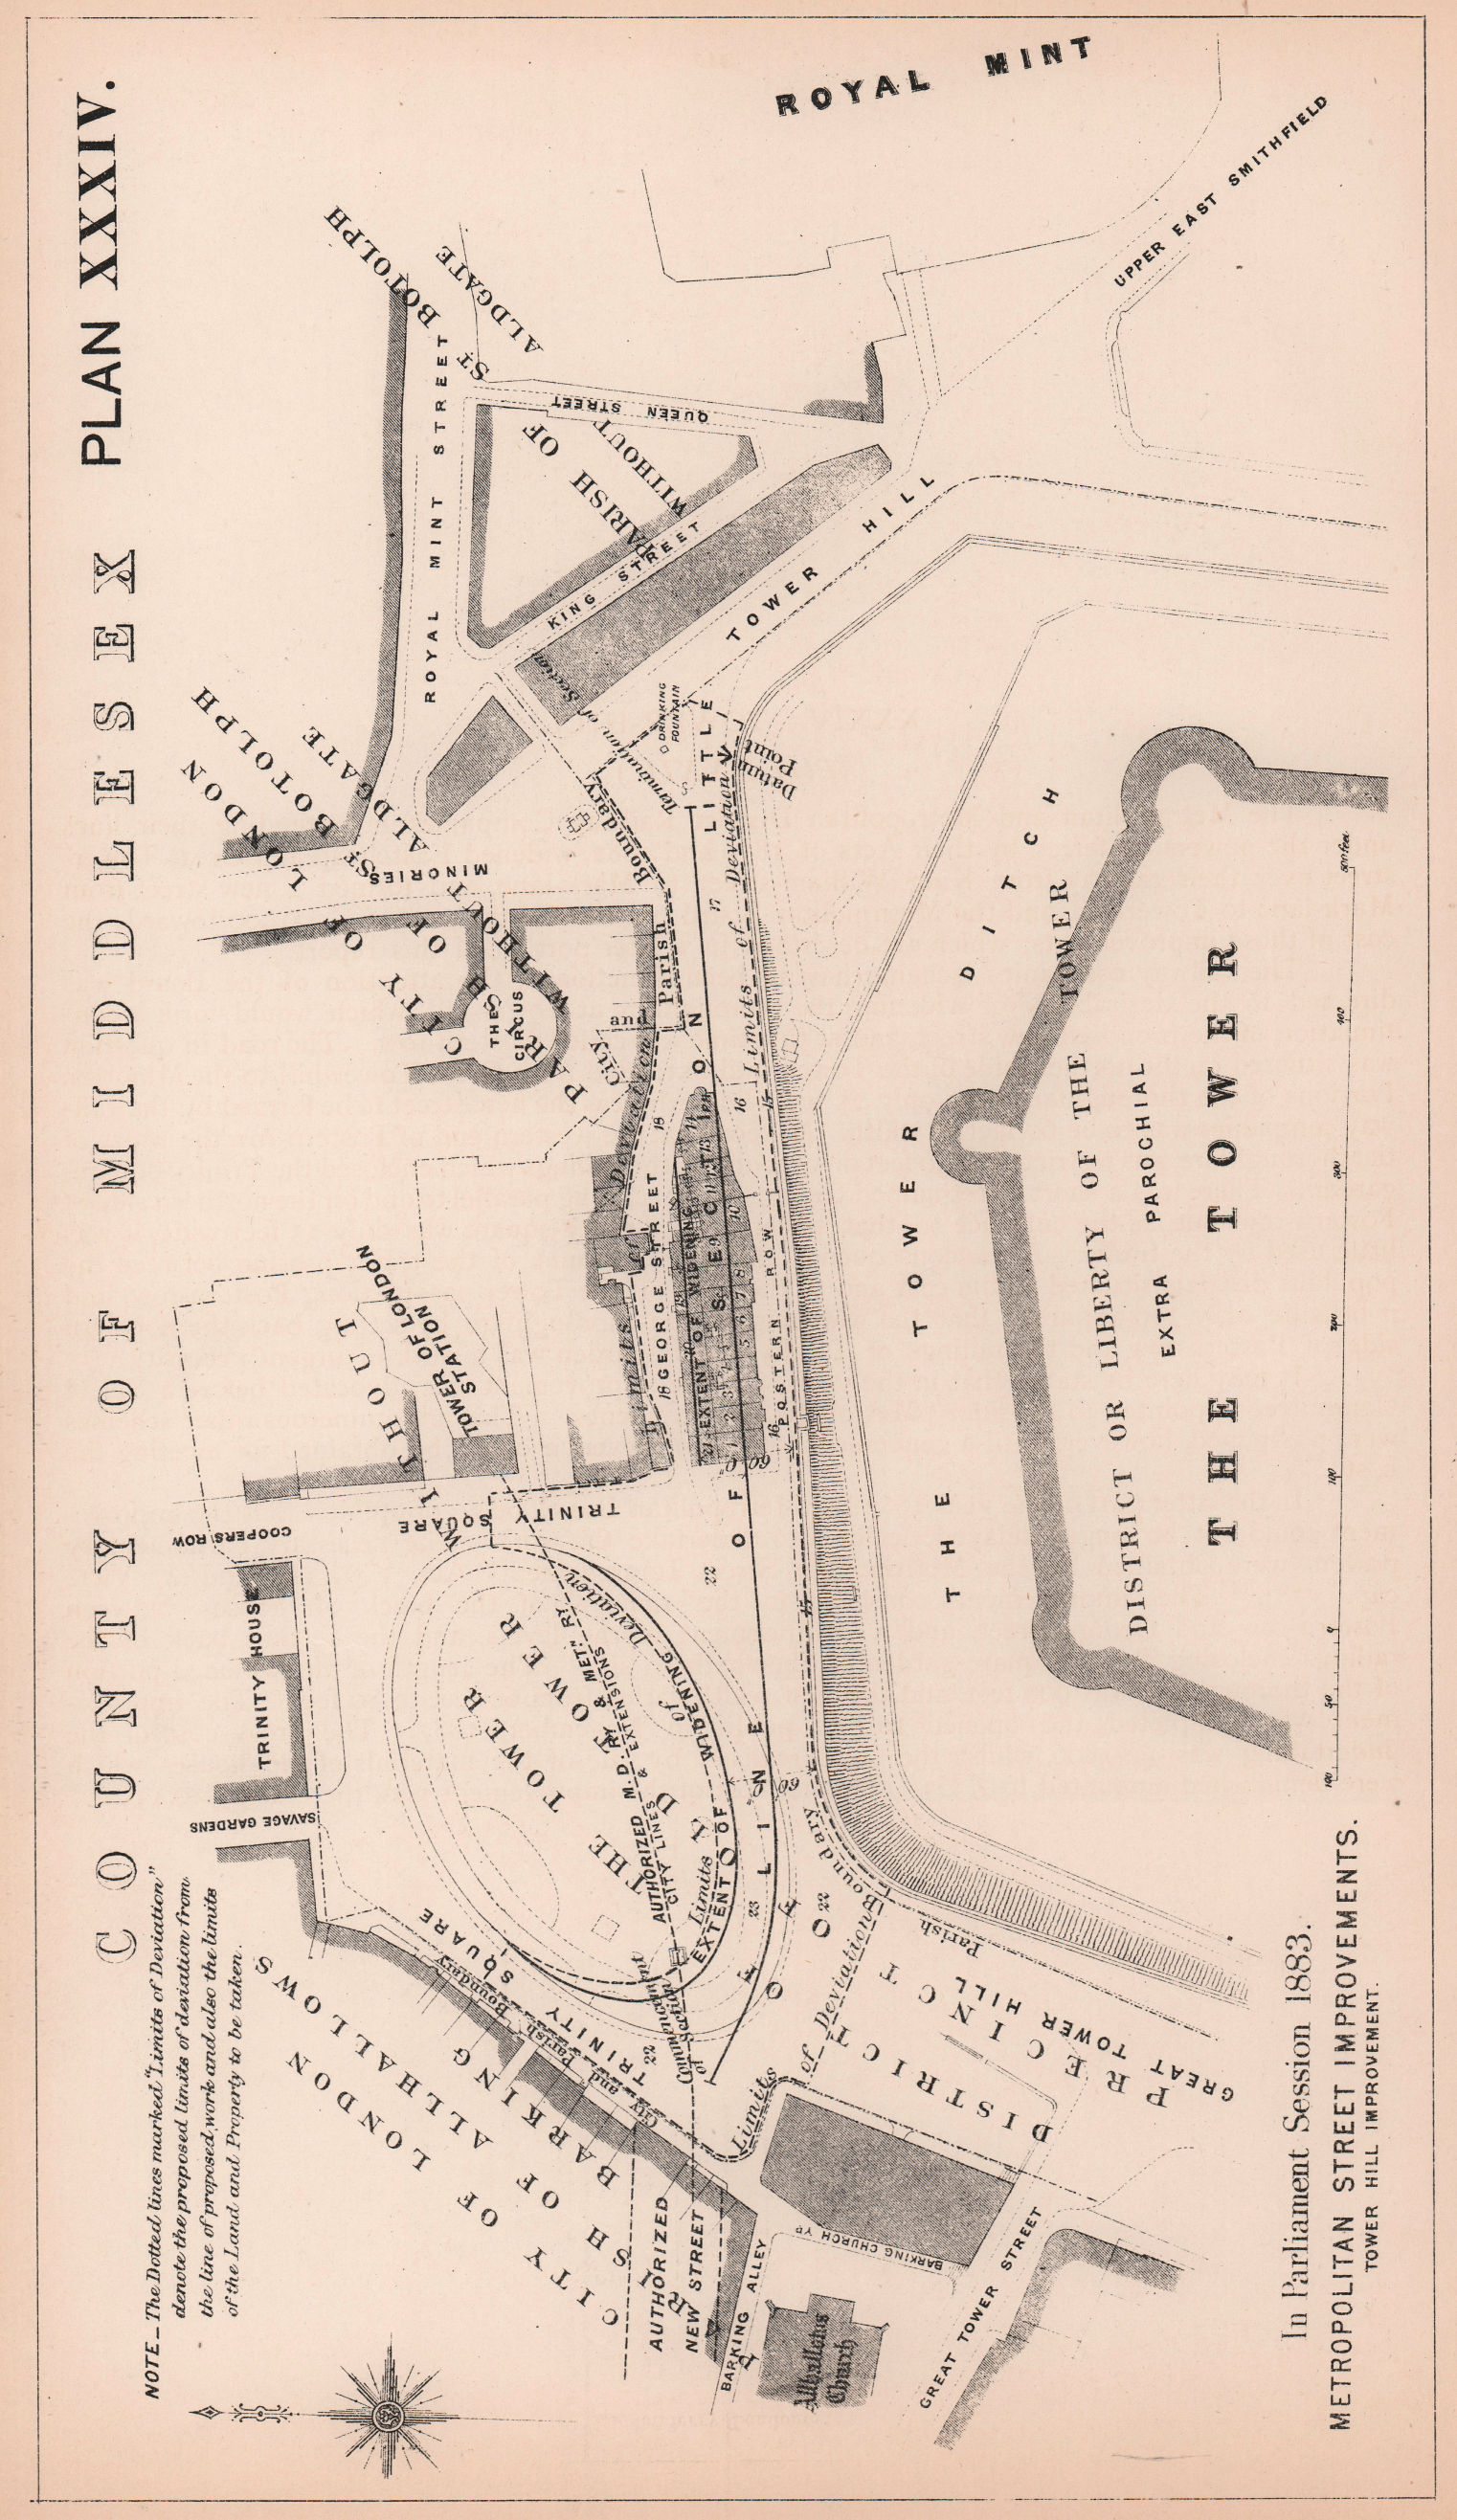 Associate Product 1883 Tower Hill widening. Byward Street & Circle line development 1898 old map